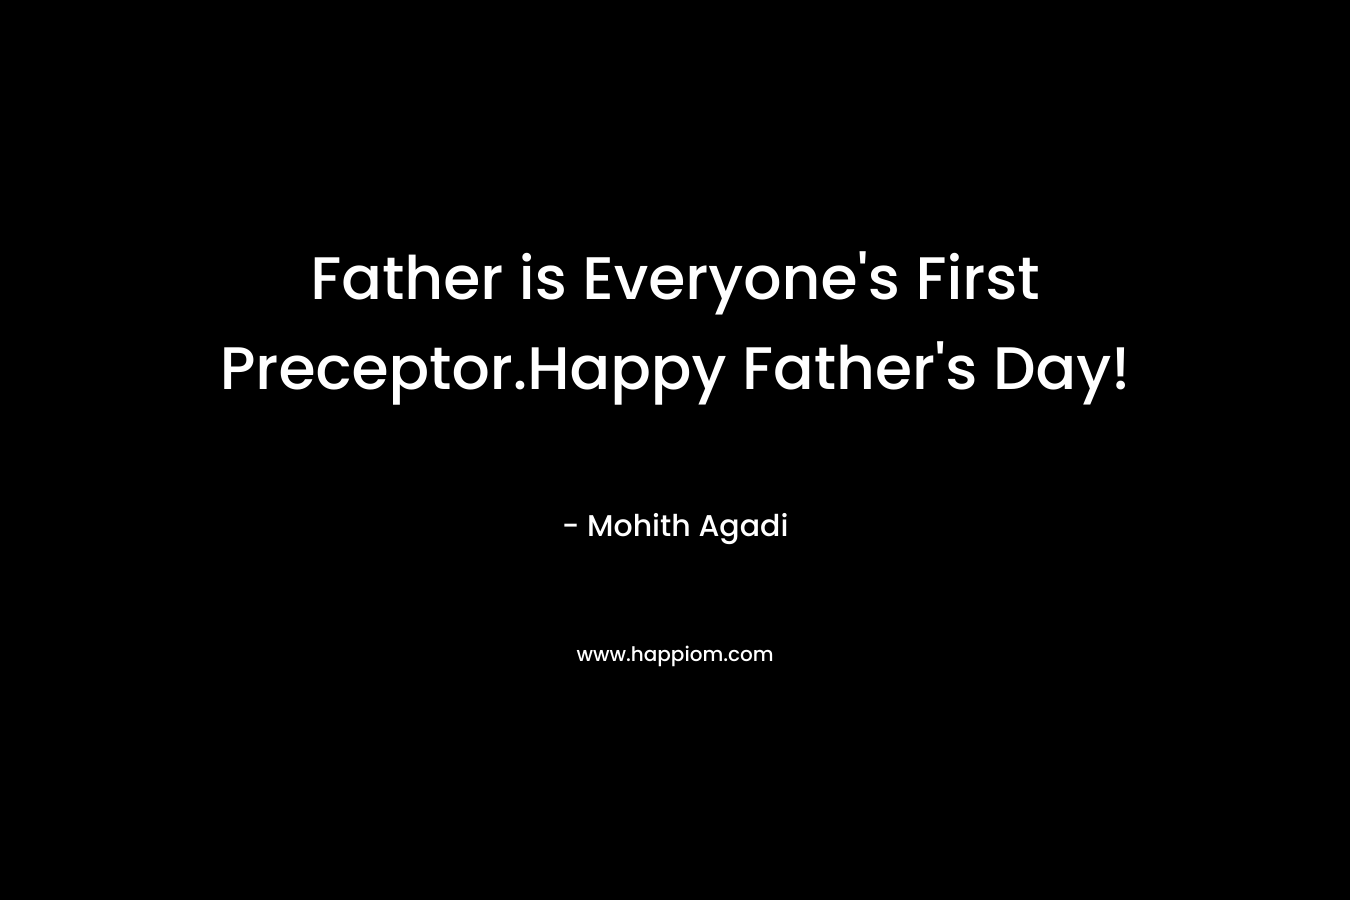 Father is Everyone's First Preceptor.Happy Father's Day!